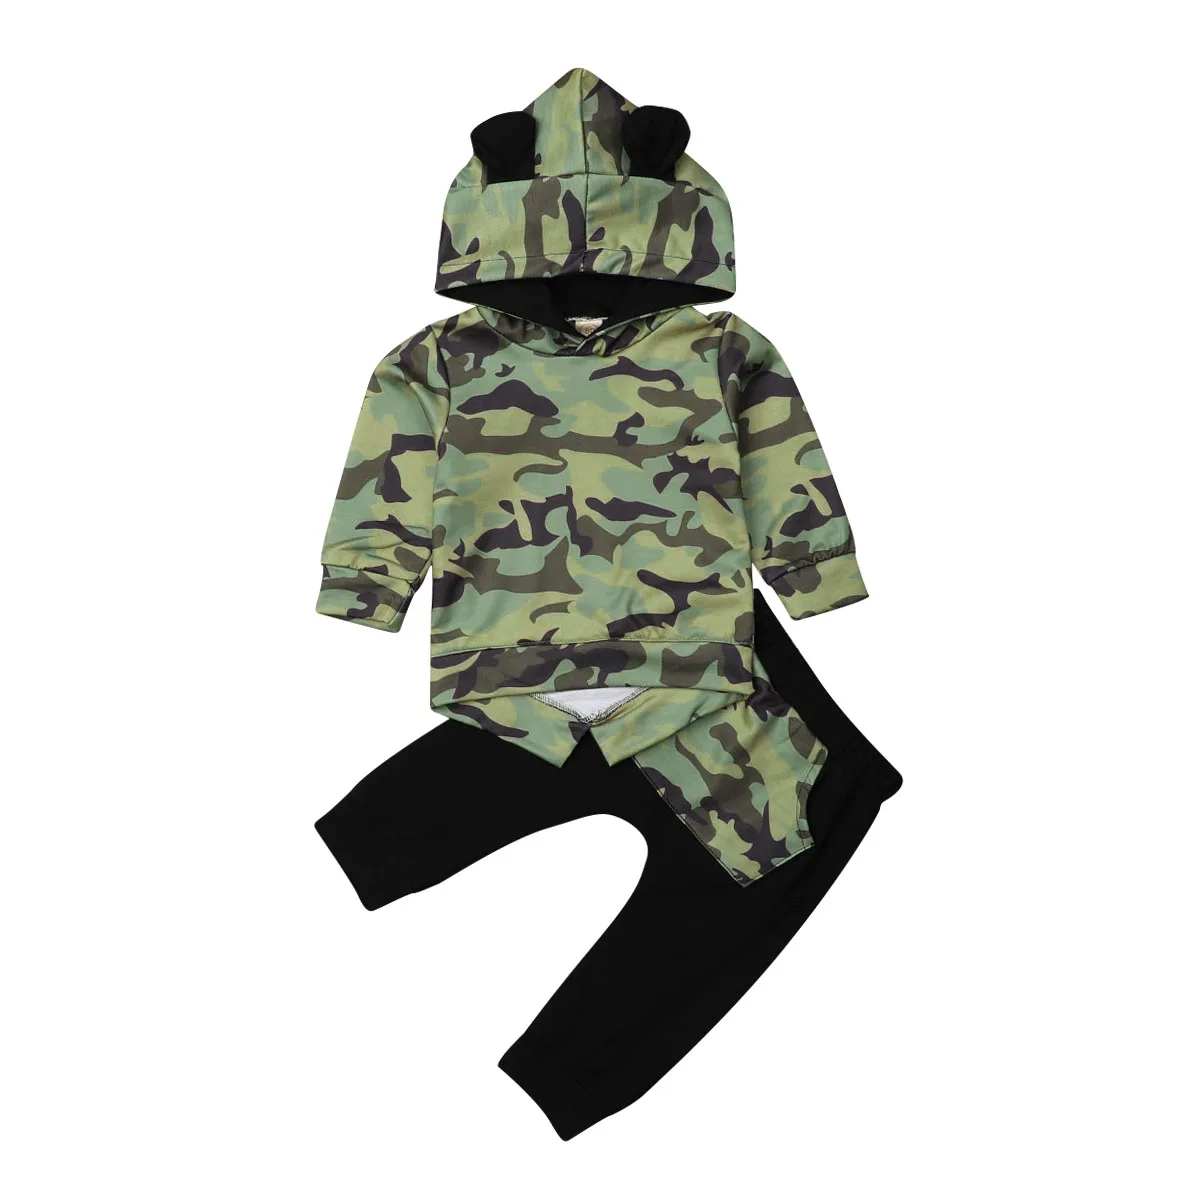 

Baby Kids Camouflage Clothes Sets Toddler Kid Babies Boys Girls Hooded Ears Tops Camo Pants Outfits Clothing 0-4T